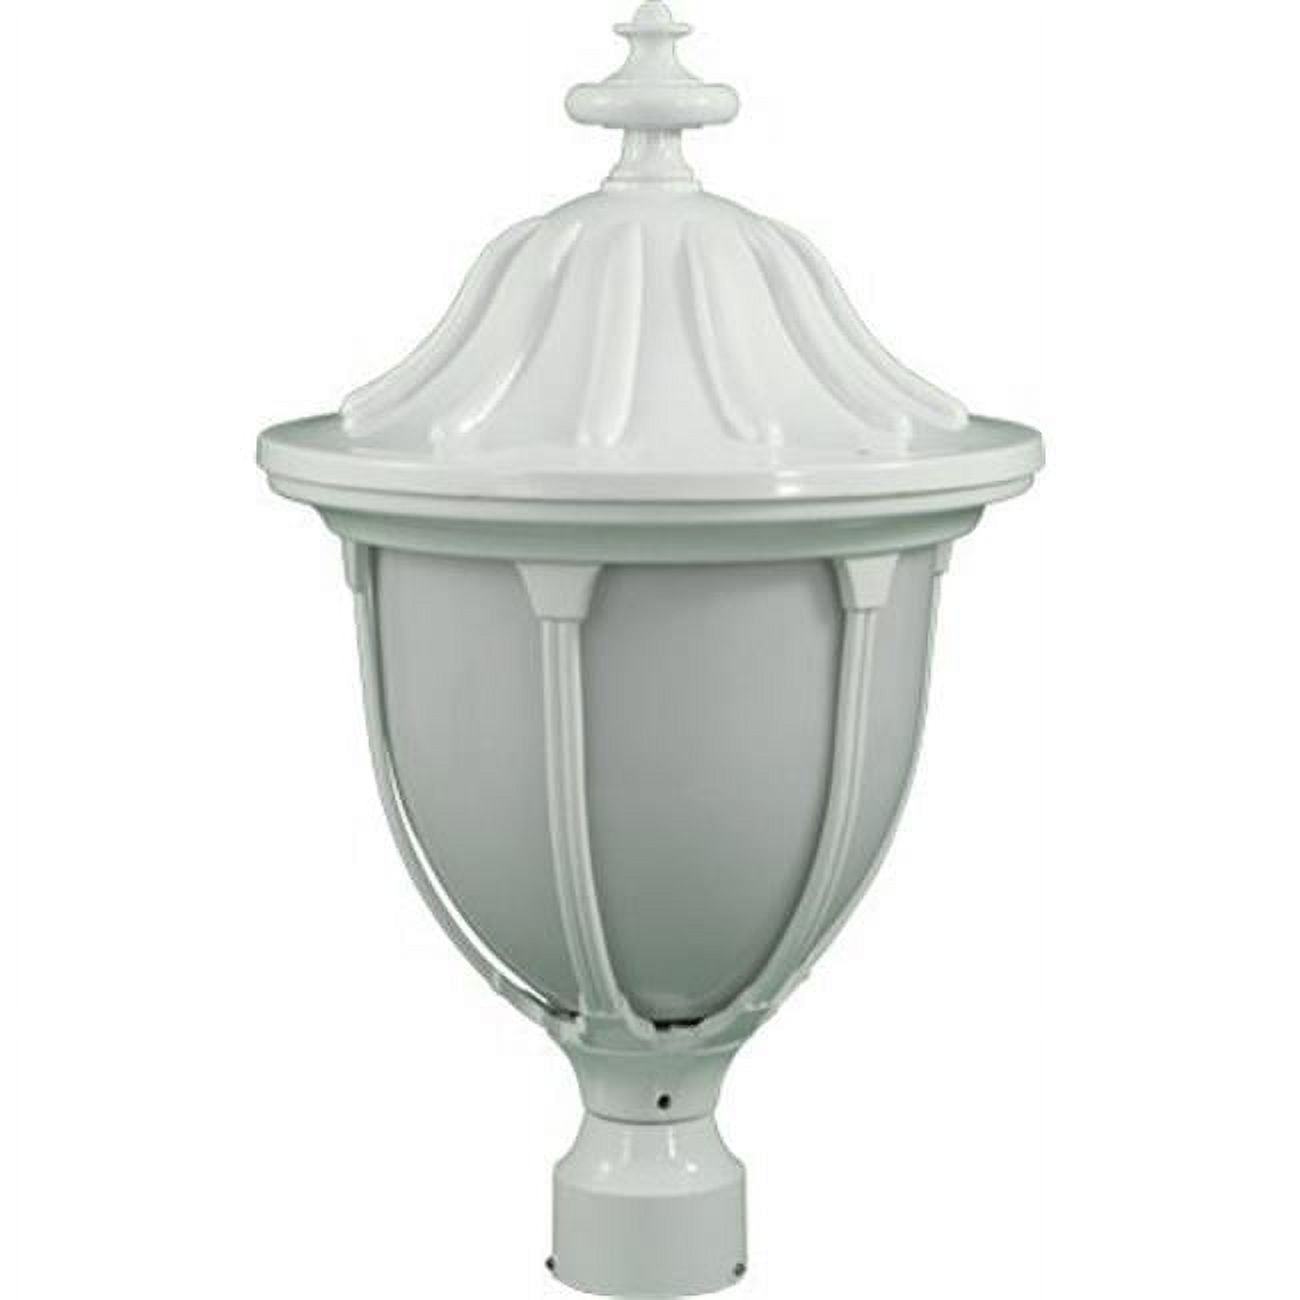 Picture of Dabmar Lighting GM552-W Powder Coated Cast Aluminum Post Top Light Fixture, White - 21.38 x 12.50 x 12.50 in.